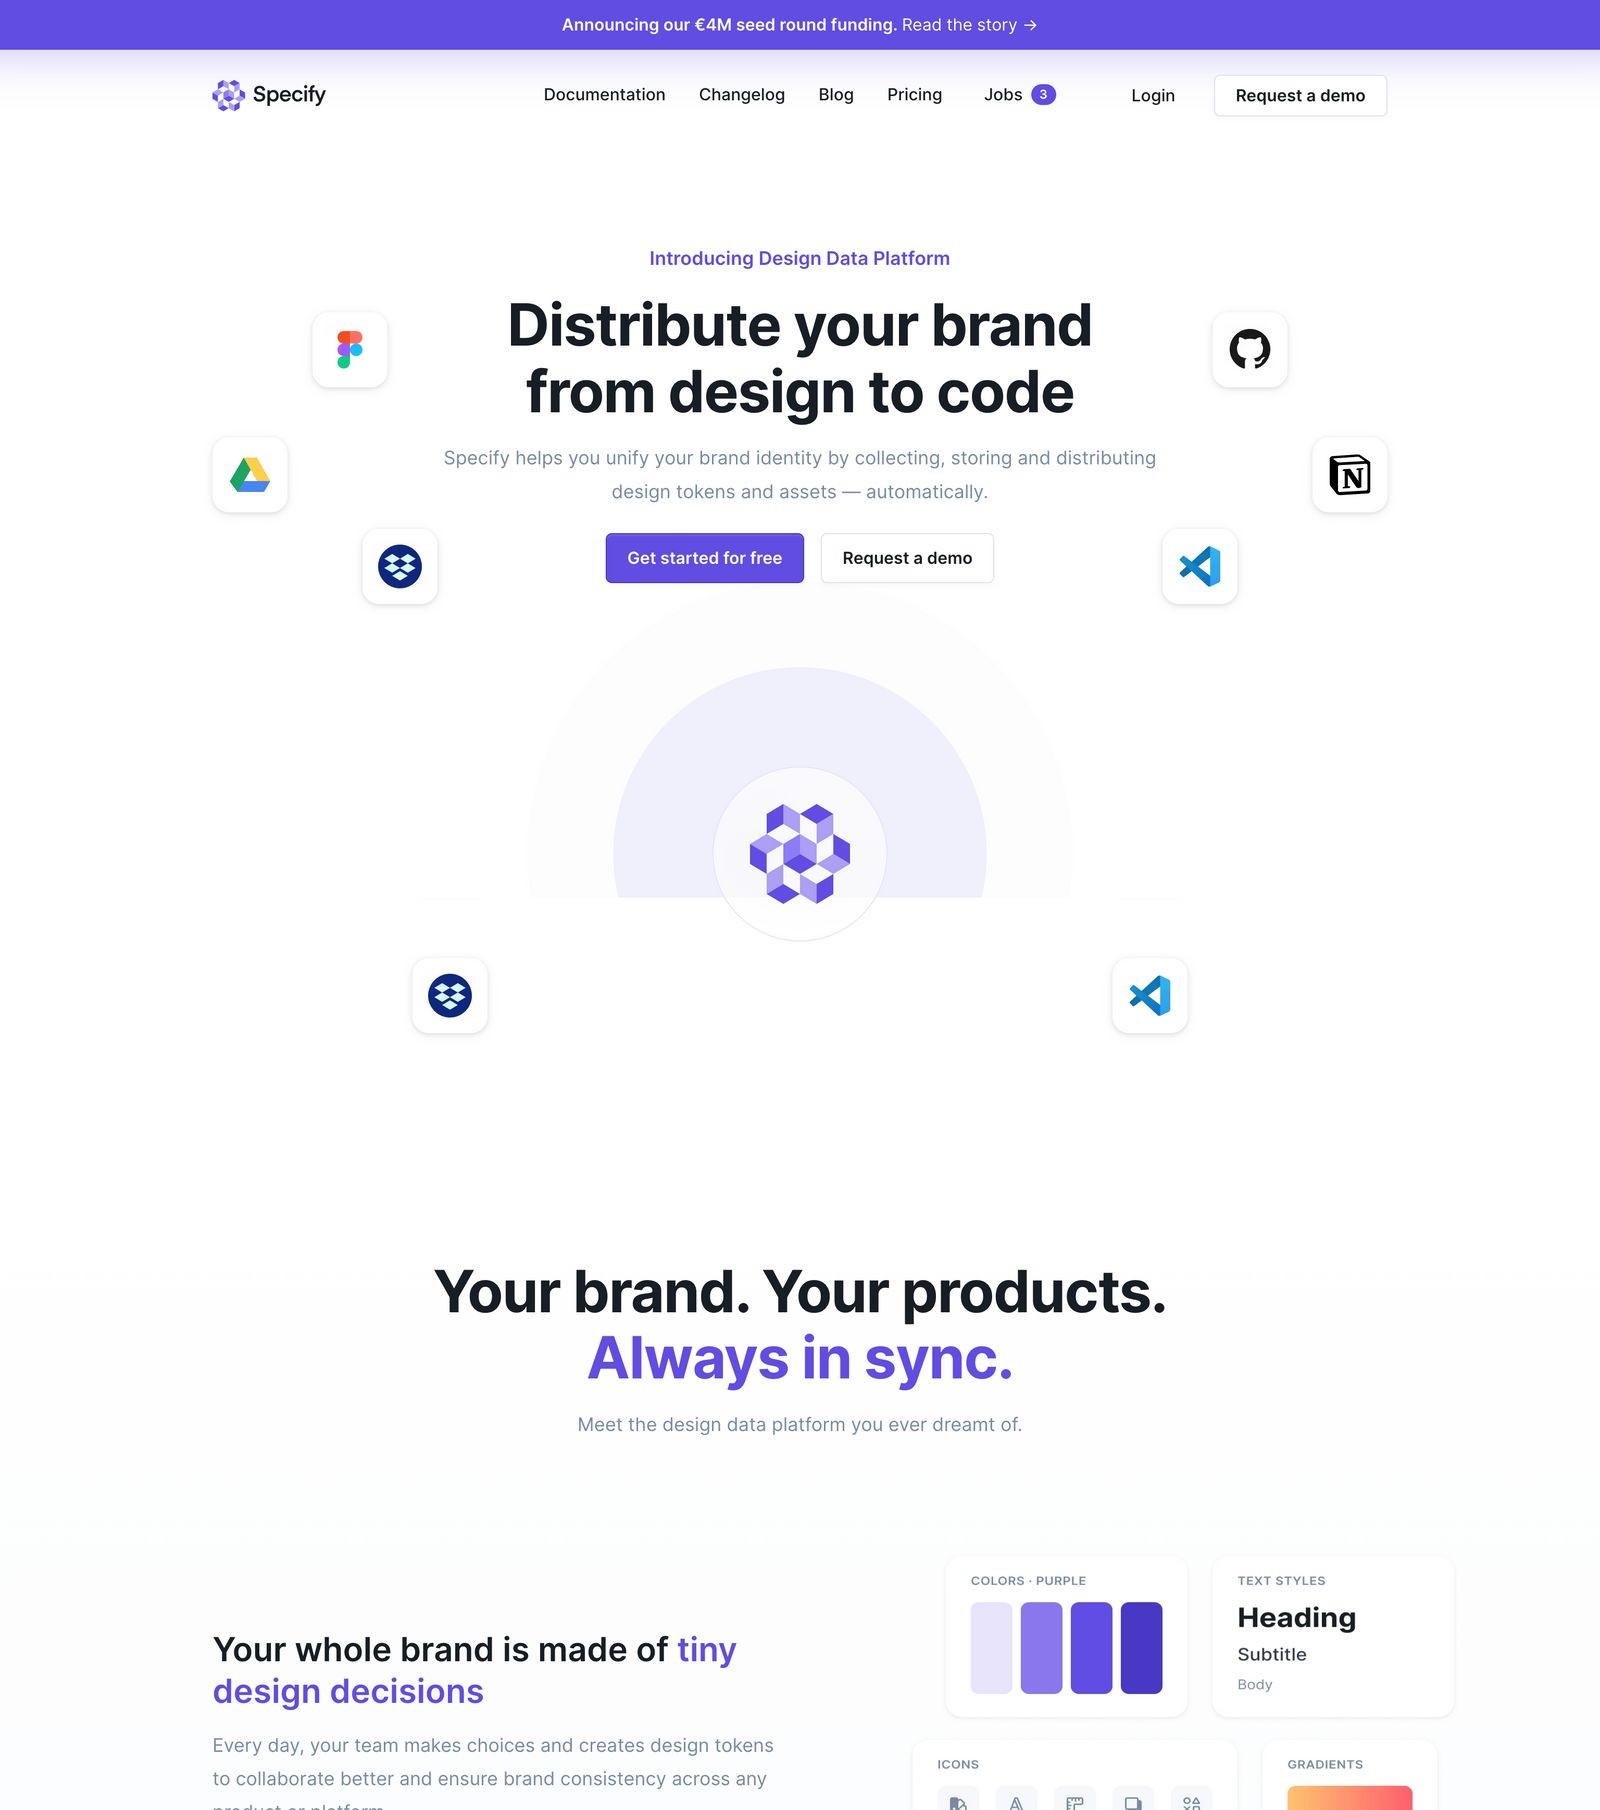 /articles/landing-page-inspiration/landing-page-design-example-6.jpg)_Saas Landing page example from Specify